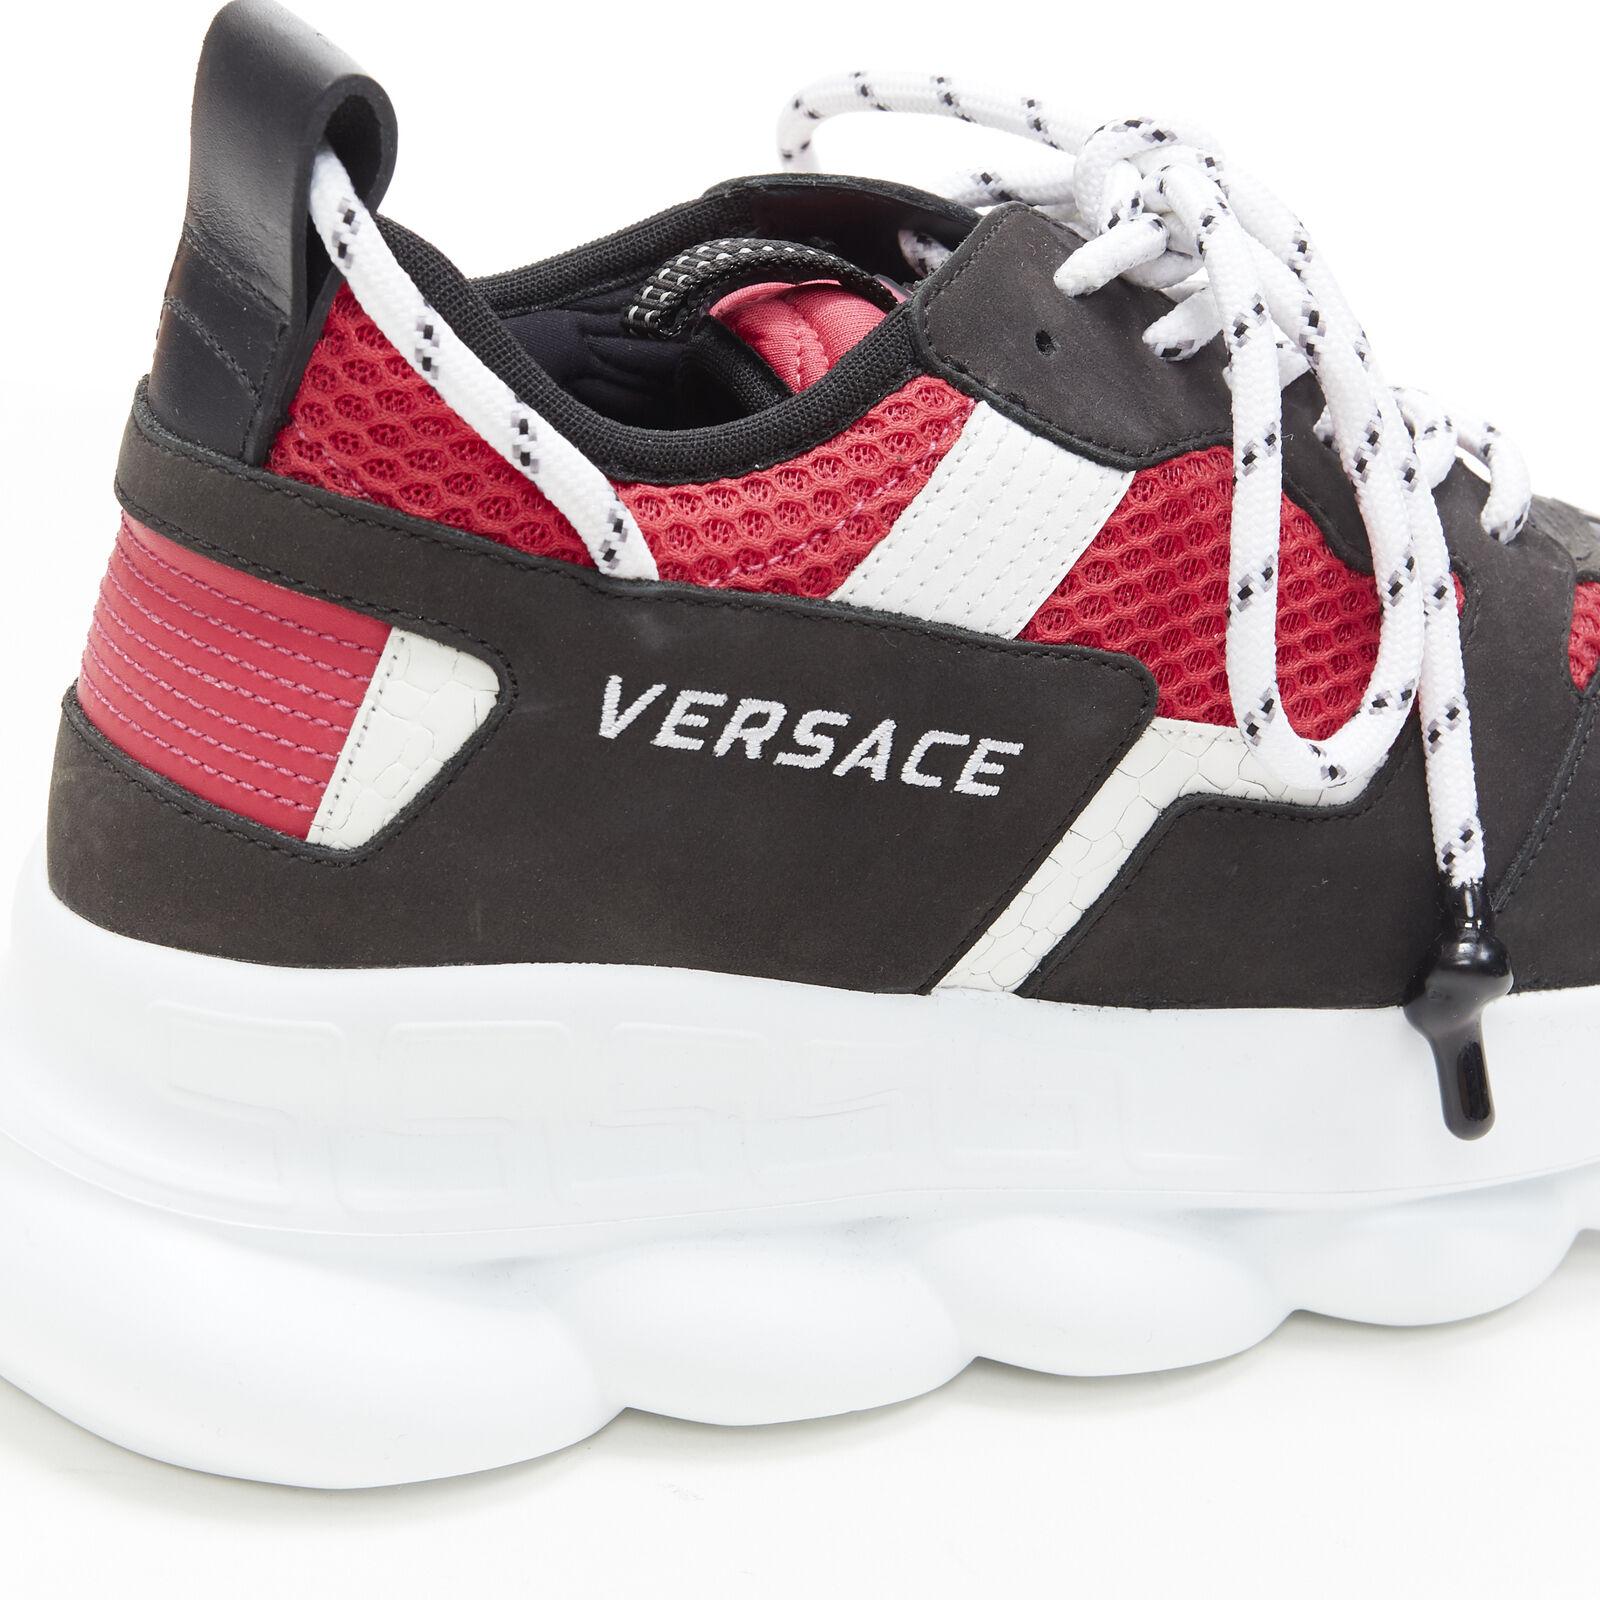 new VERSACE Chain Reaction Black Red suede low top chunky sneaker EU38 US5 5